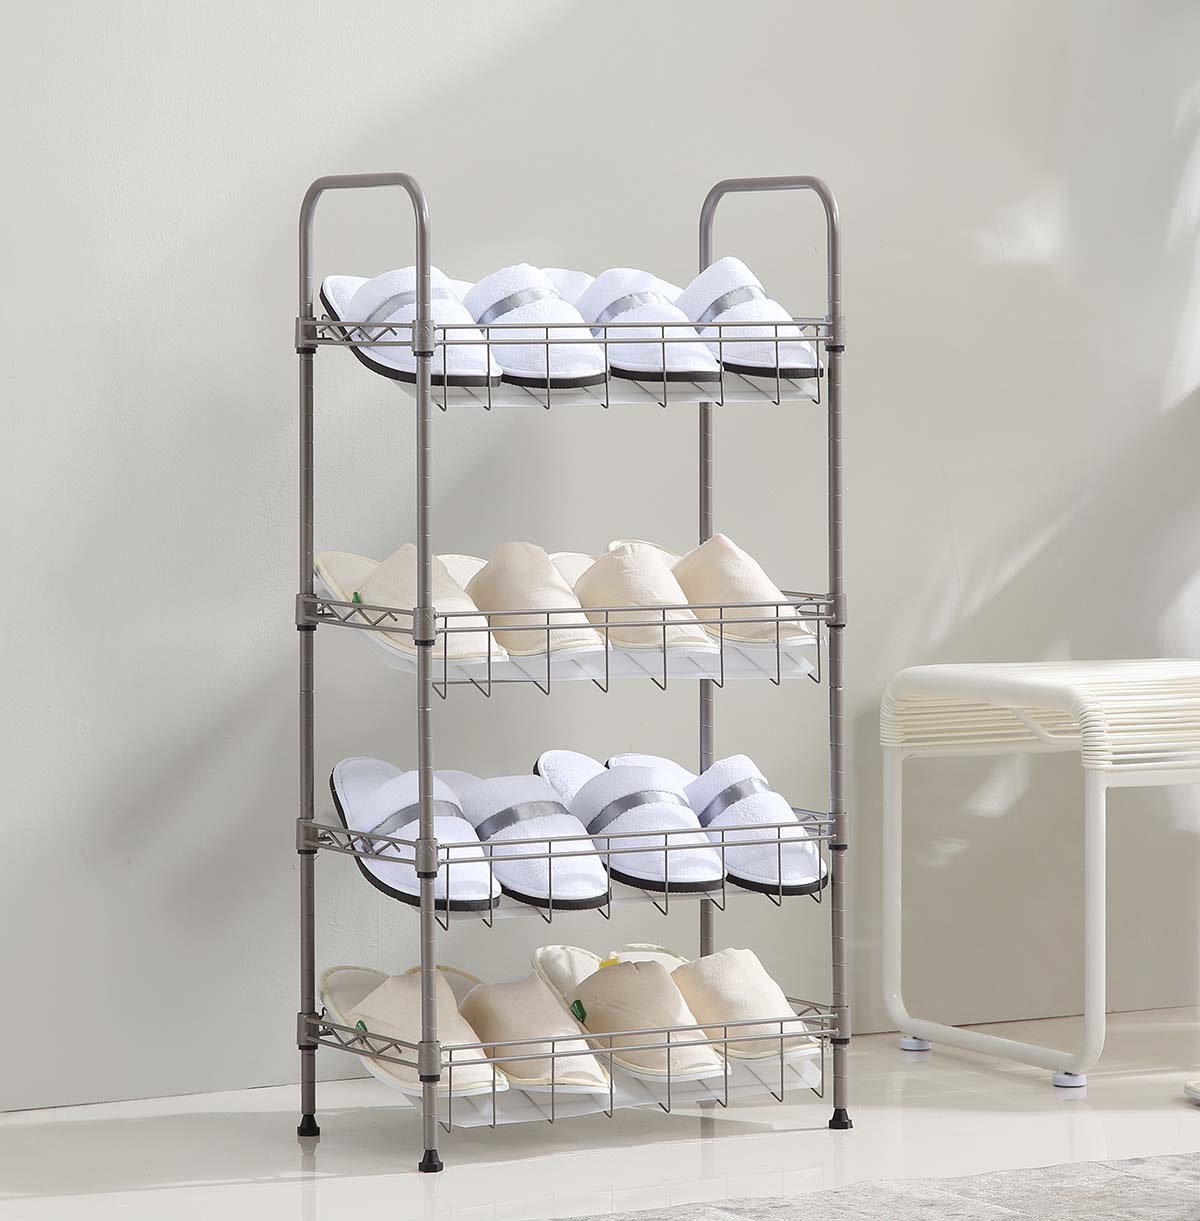 What are the common materials for shelves?